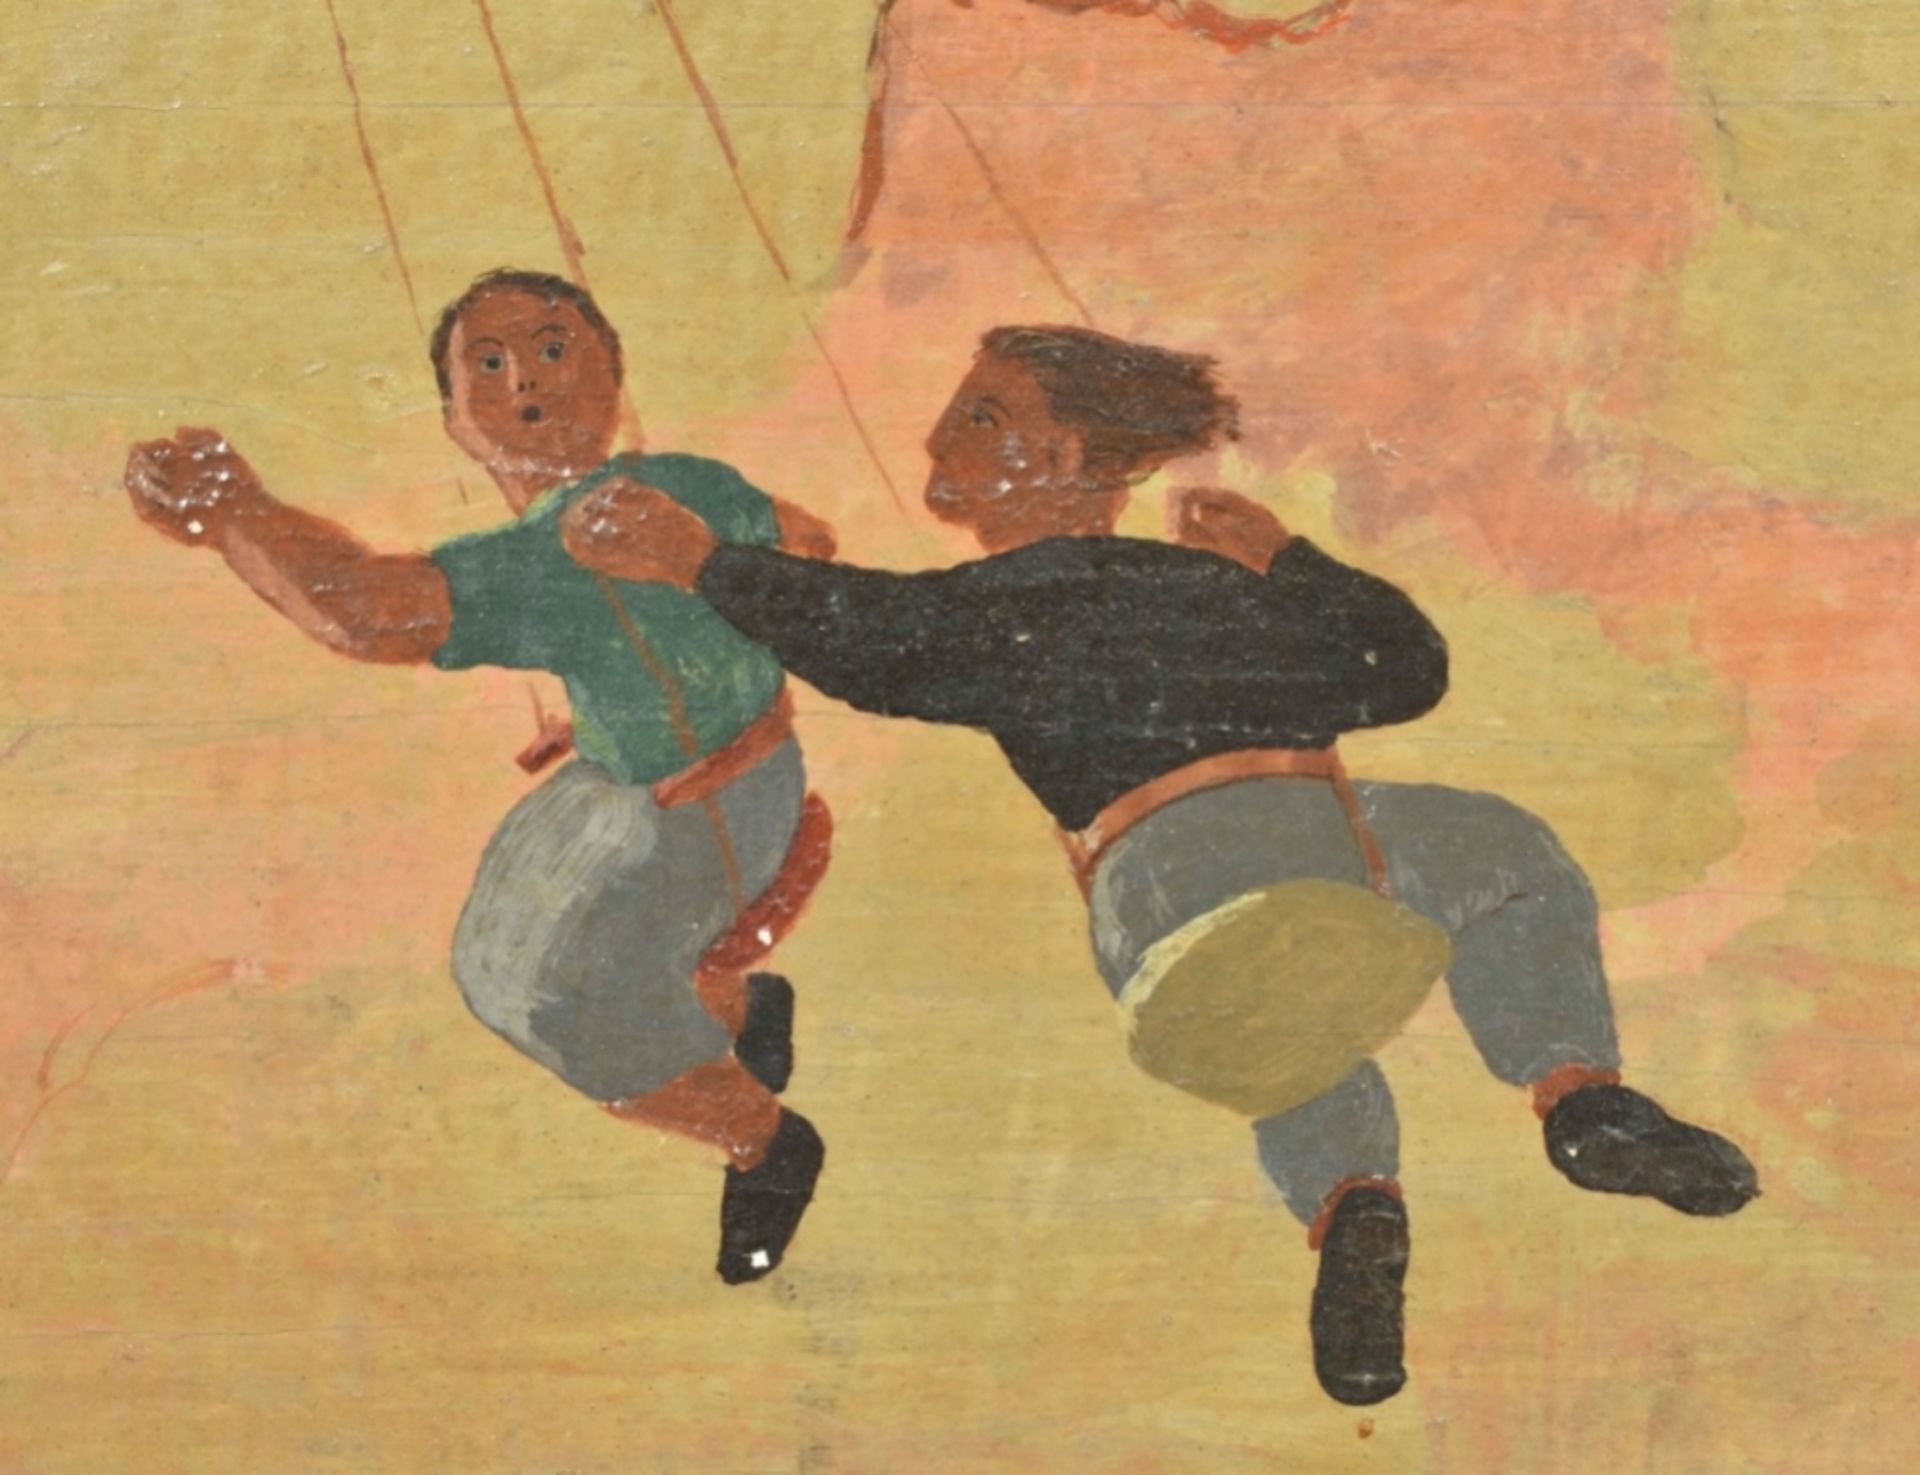 Grover Chapman (1924-2000). "Children in a swing ride" - Image 4 of 6